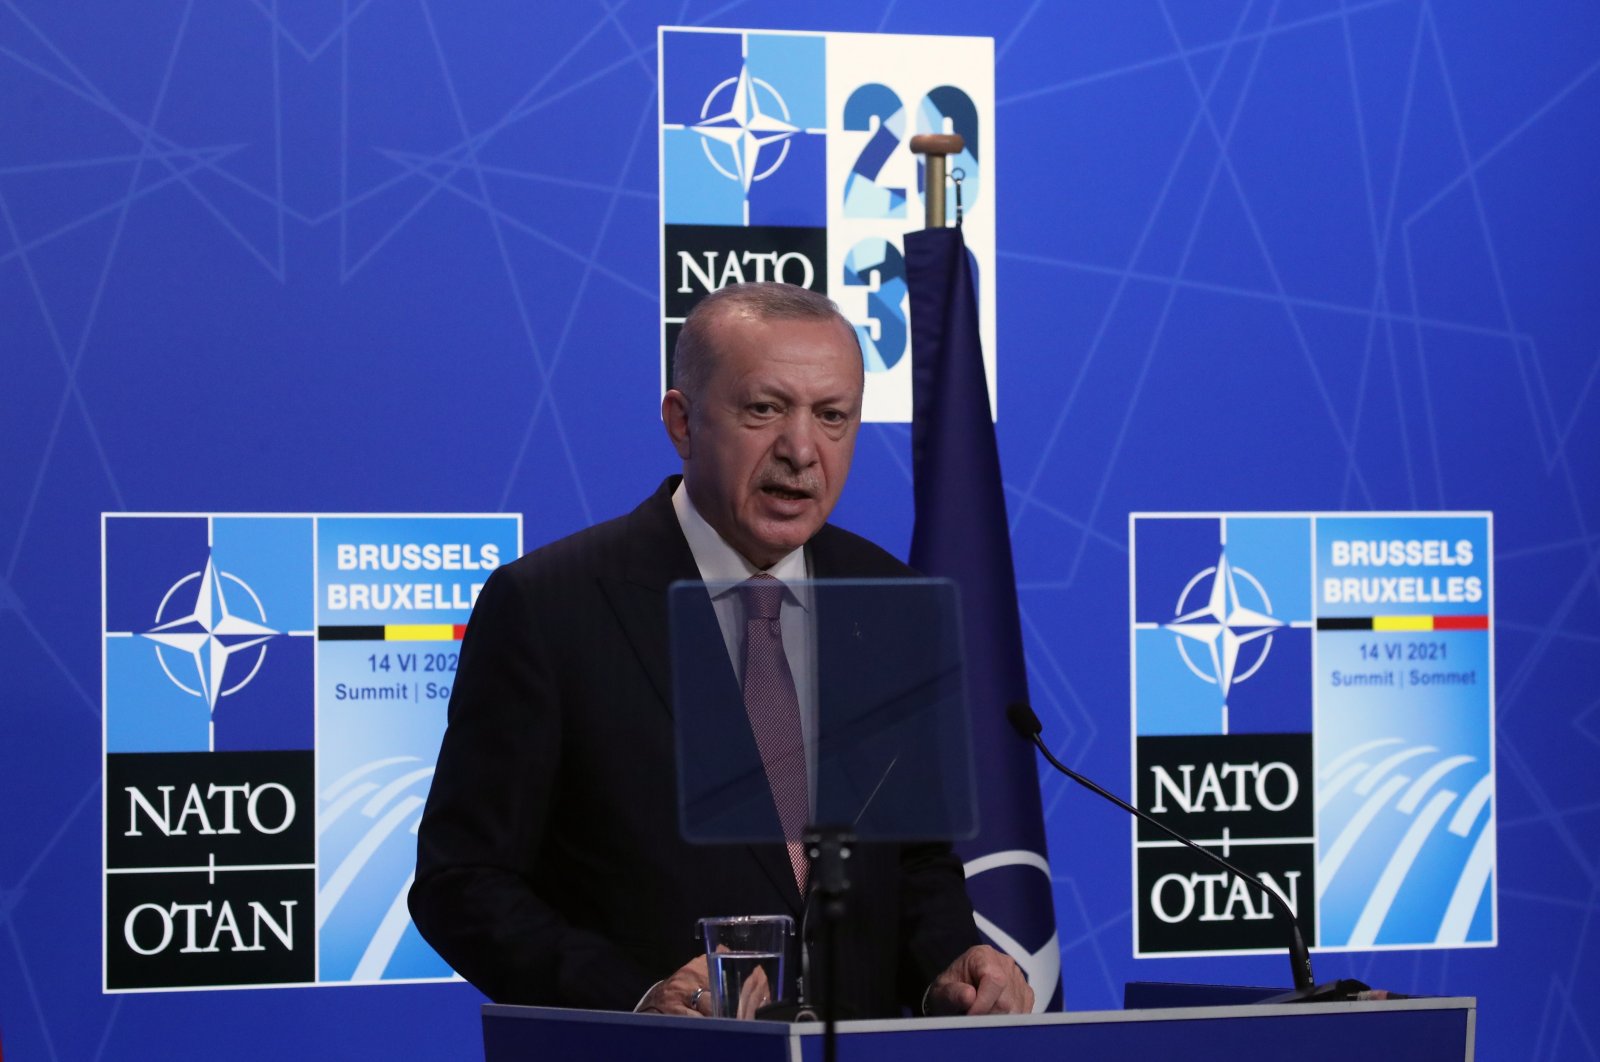 President Recep Tayyip Erdoğan holds a news conference during the NATO summit at the alliance's headquarters in Brussels, Belgium, June 14, 2021. (EPA Photo)